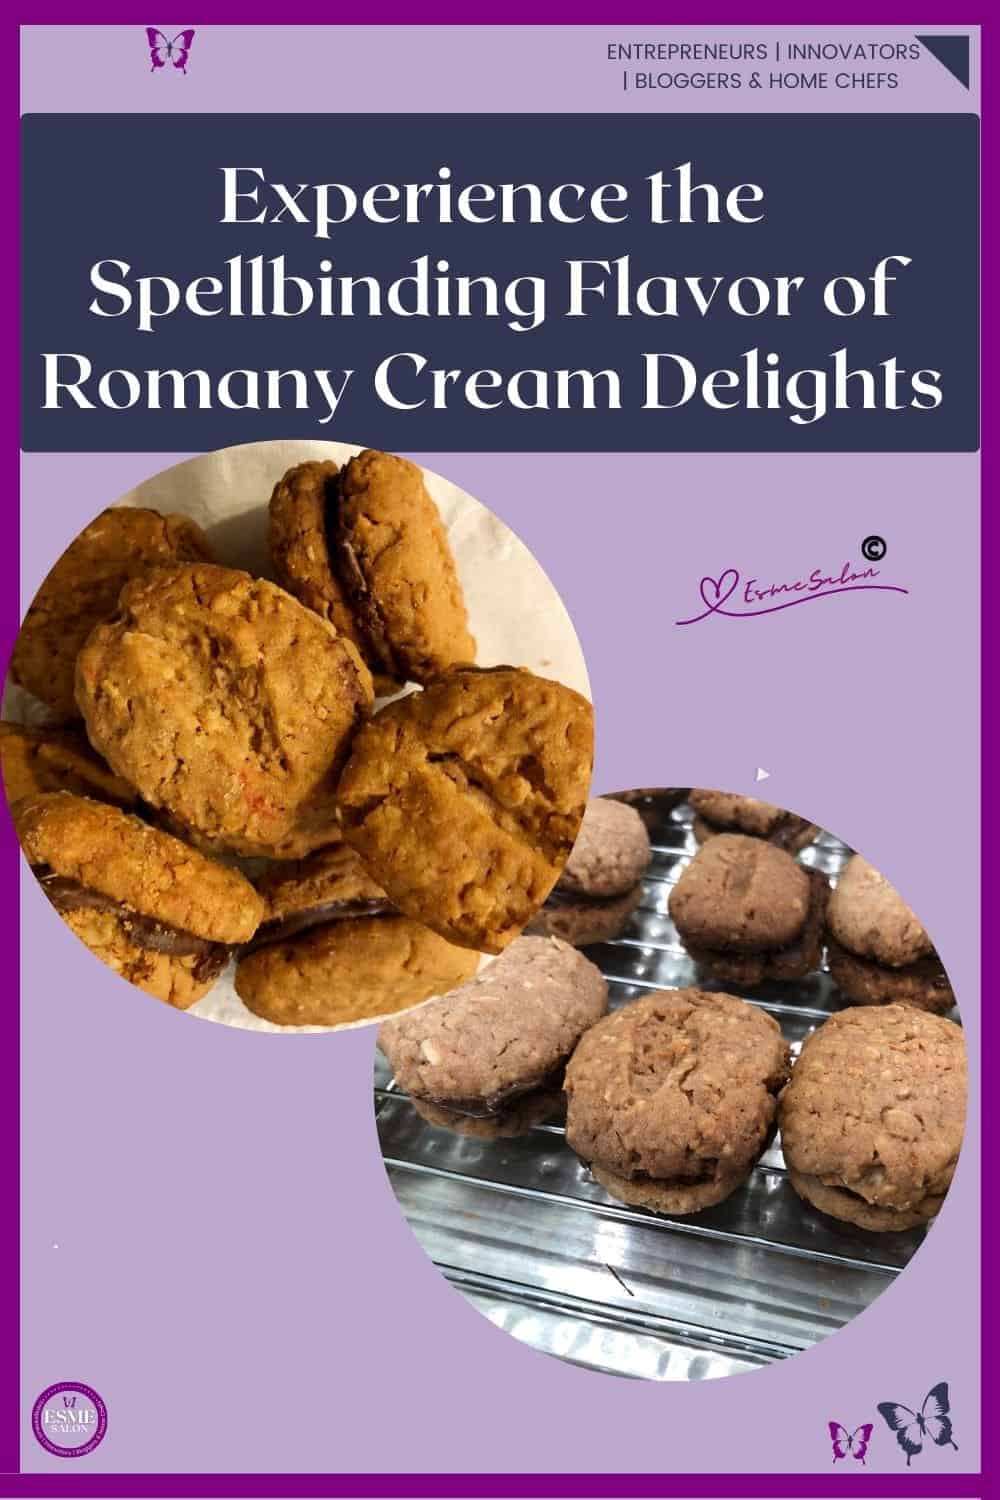 an image of Romany Creams filled with brown chocolate.